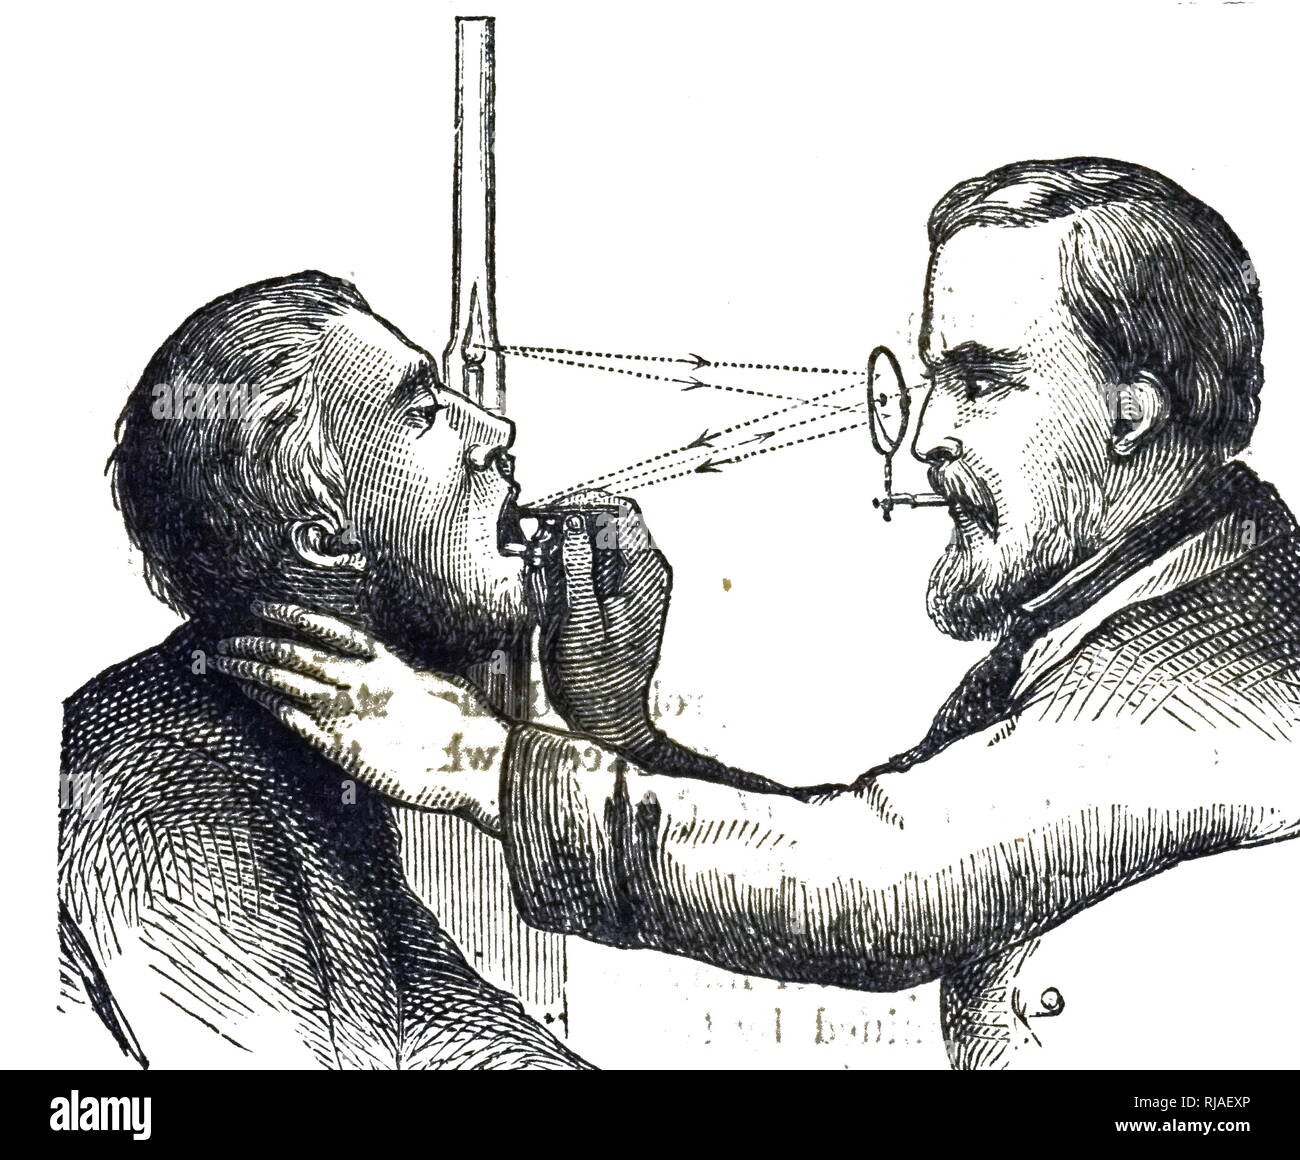 An engraving depicting Johann Nepomuk Czermak's laryngoscope used to perform a laryngoscopy, an endoscopy of the larynx.  Johann Nepomuk Czermak (1828-1873) an Austrian-German physiologist and member of the Austrian Academy of Sciences. Dated 19th century Stock Photo